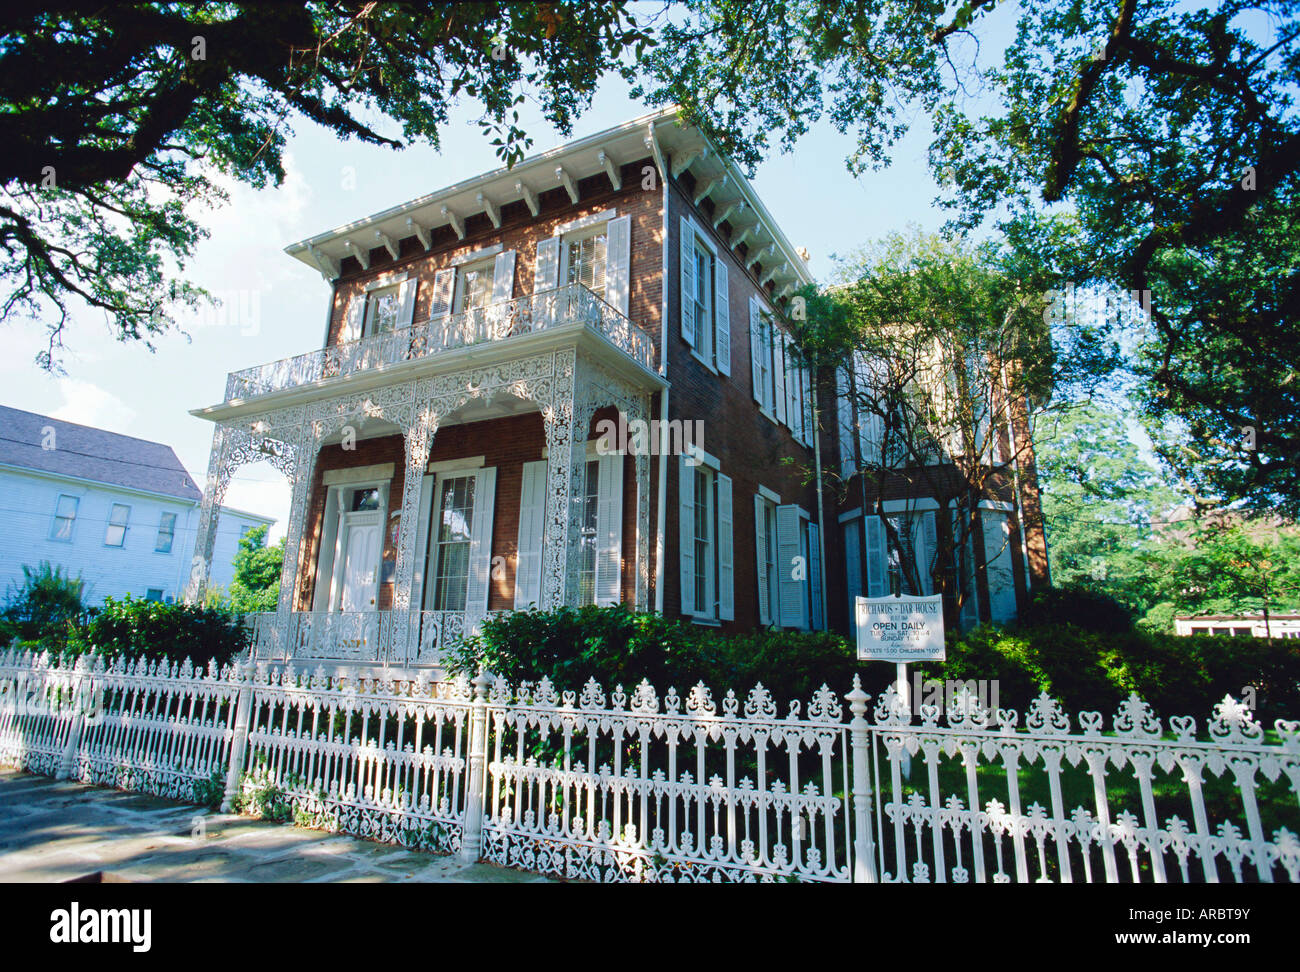 The 1860 Richards-Dar House, now a museum, Italianate style in the city's historic district, Mobile, Alabama, USA Stock Photo